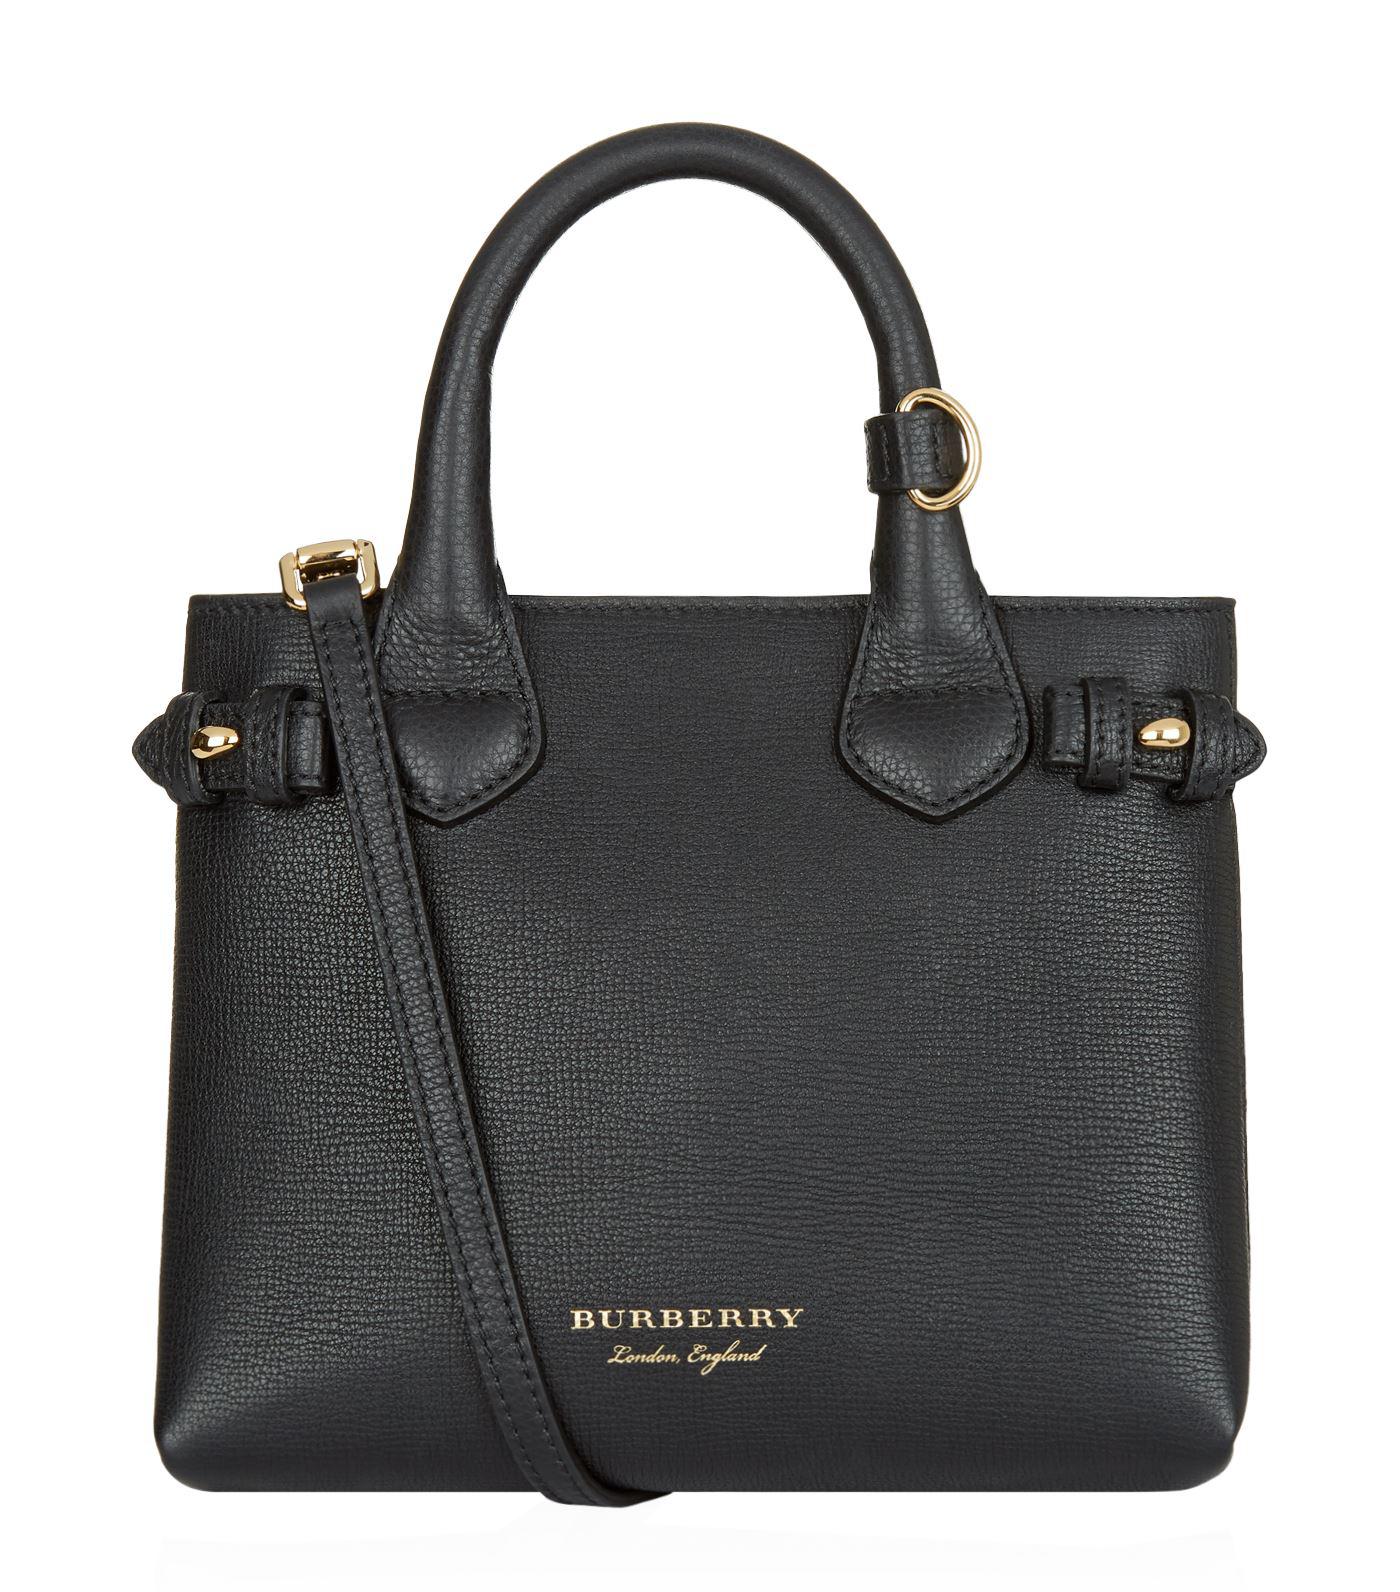 Burberry Leather Baby Banner Tote Bag in Black - Lyst